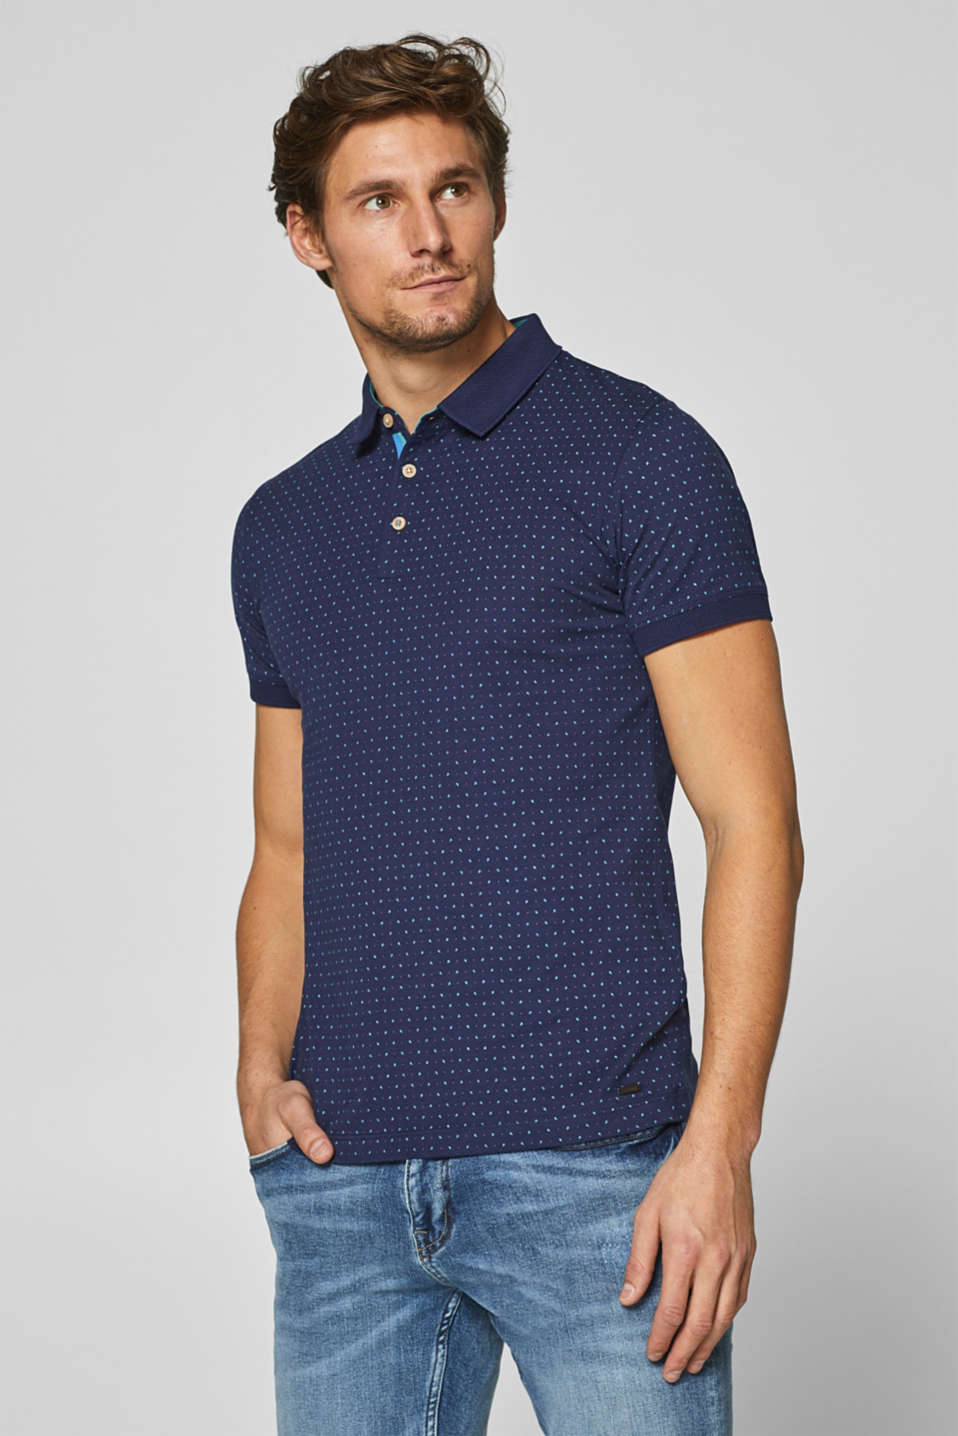 Esprit - Jersey polo shirt in 100% cotton at our Online Shop